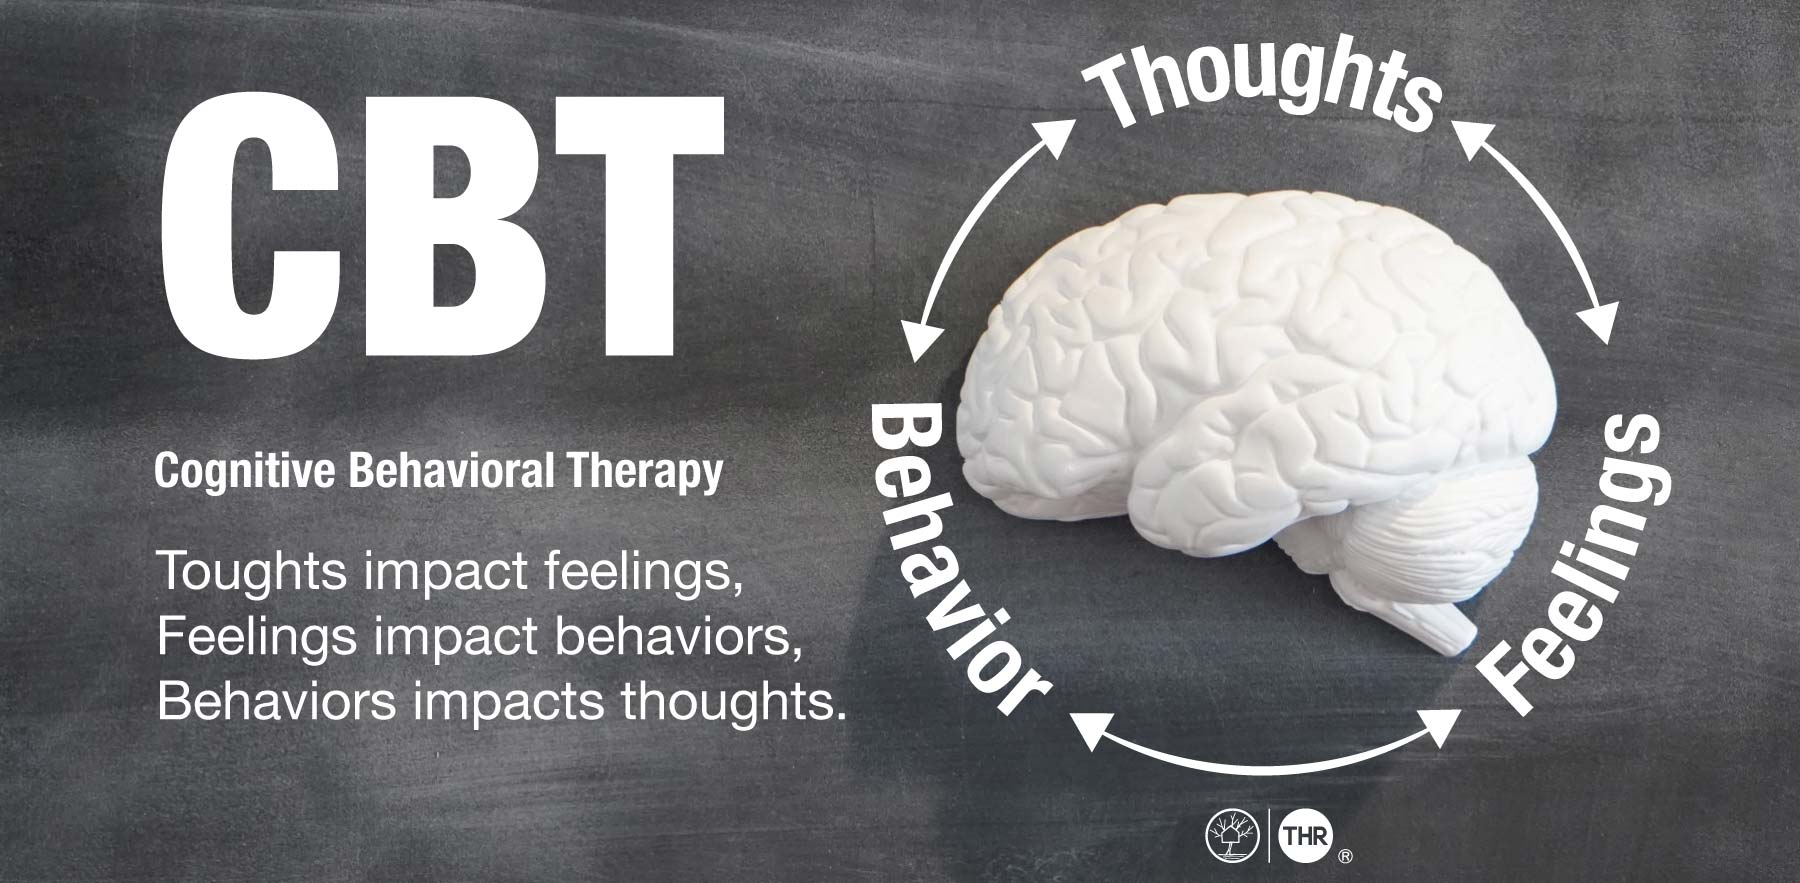 Cognitive Bahavioral Therapy (CBT) Illustration showing how thoughts impact feelings, feelings impact behaviors and behaviors impact thoughts.